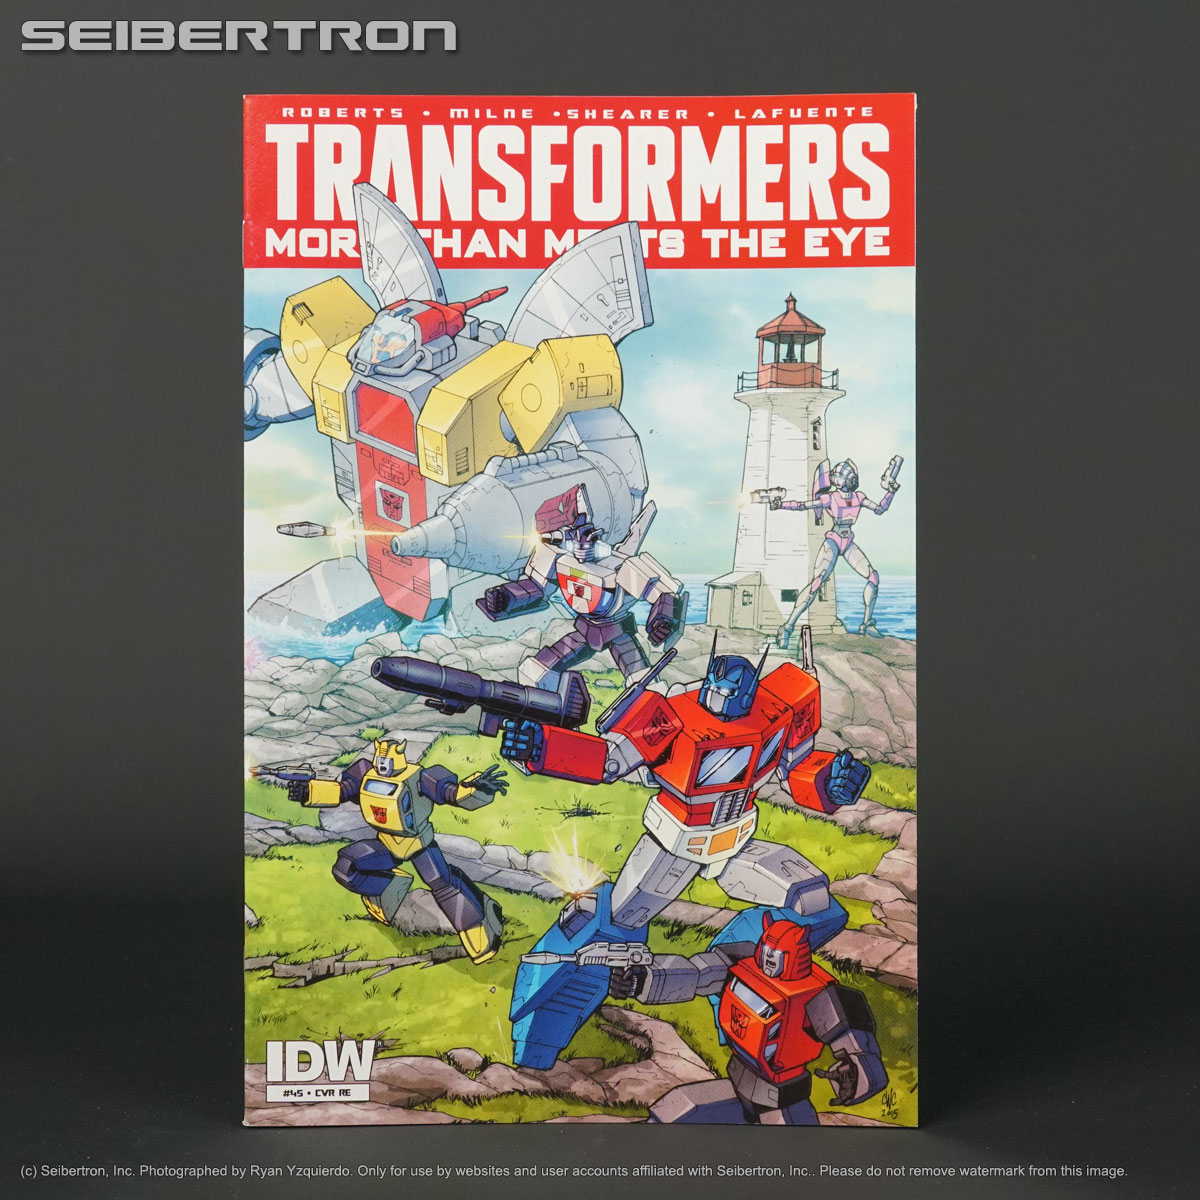 Transformers MORE THAN MEETS THE EYE #45 RE (Giant Robot Comics exclusive) IDW Comics 2015 210411A (CA) Coller (W) Roberts (A) Milne